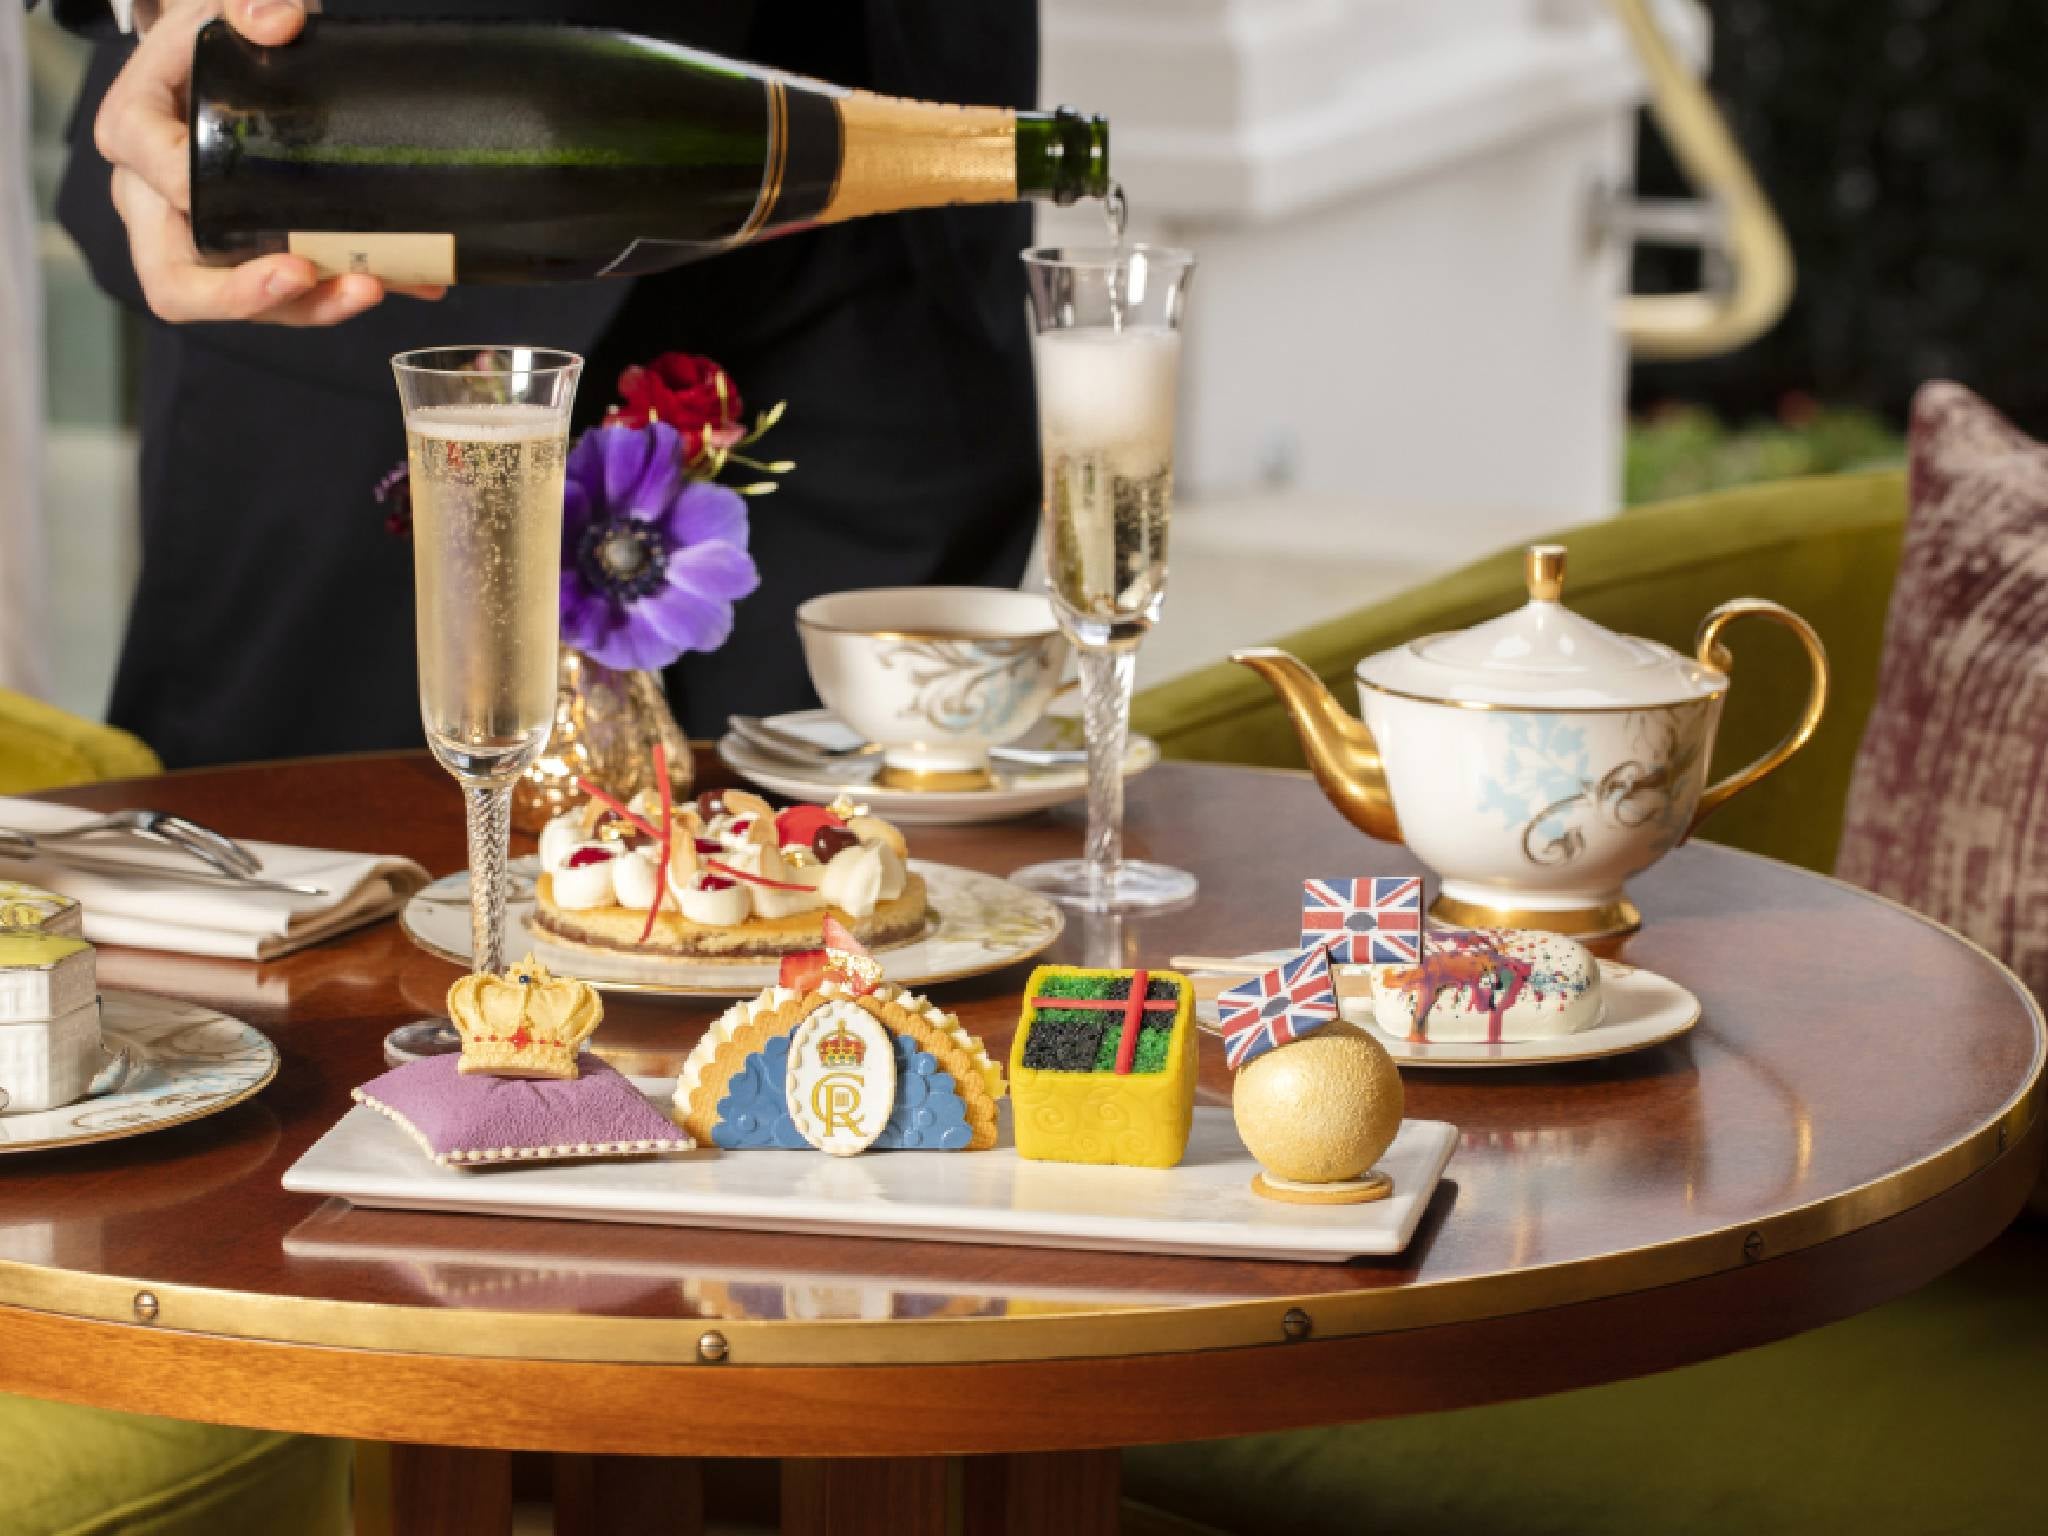 Time for tea with Highgrove at The Rosebery has been created in partnership with the royal residence